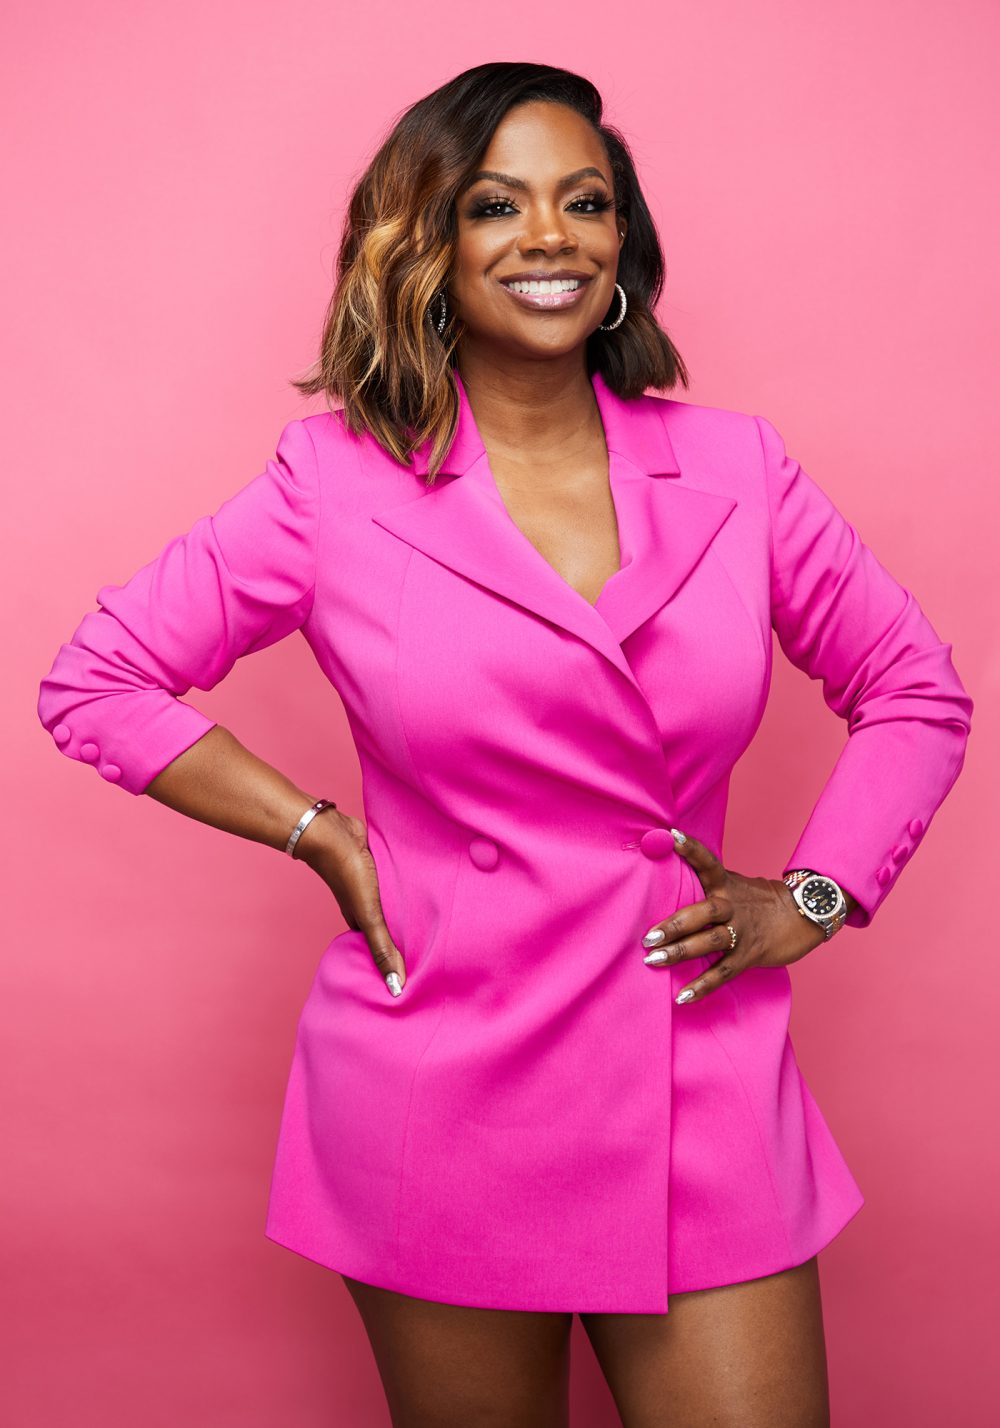 Kandi Burruss: 25 Things You Don’t Know About Me